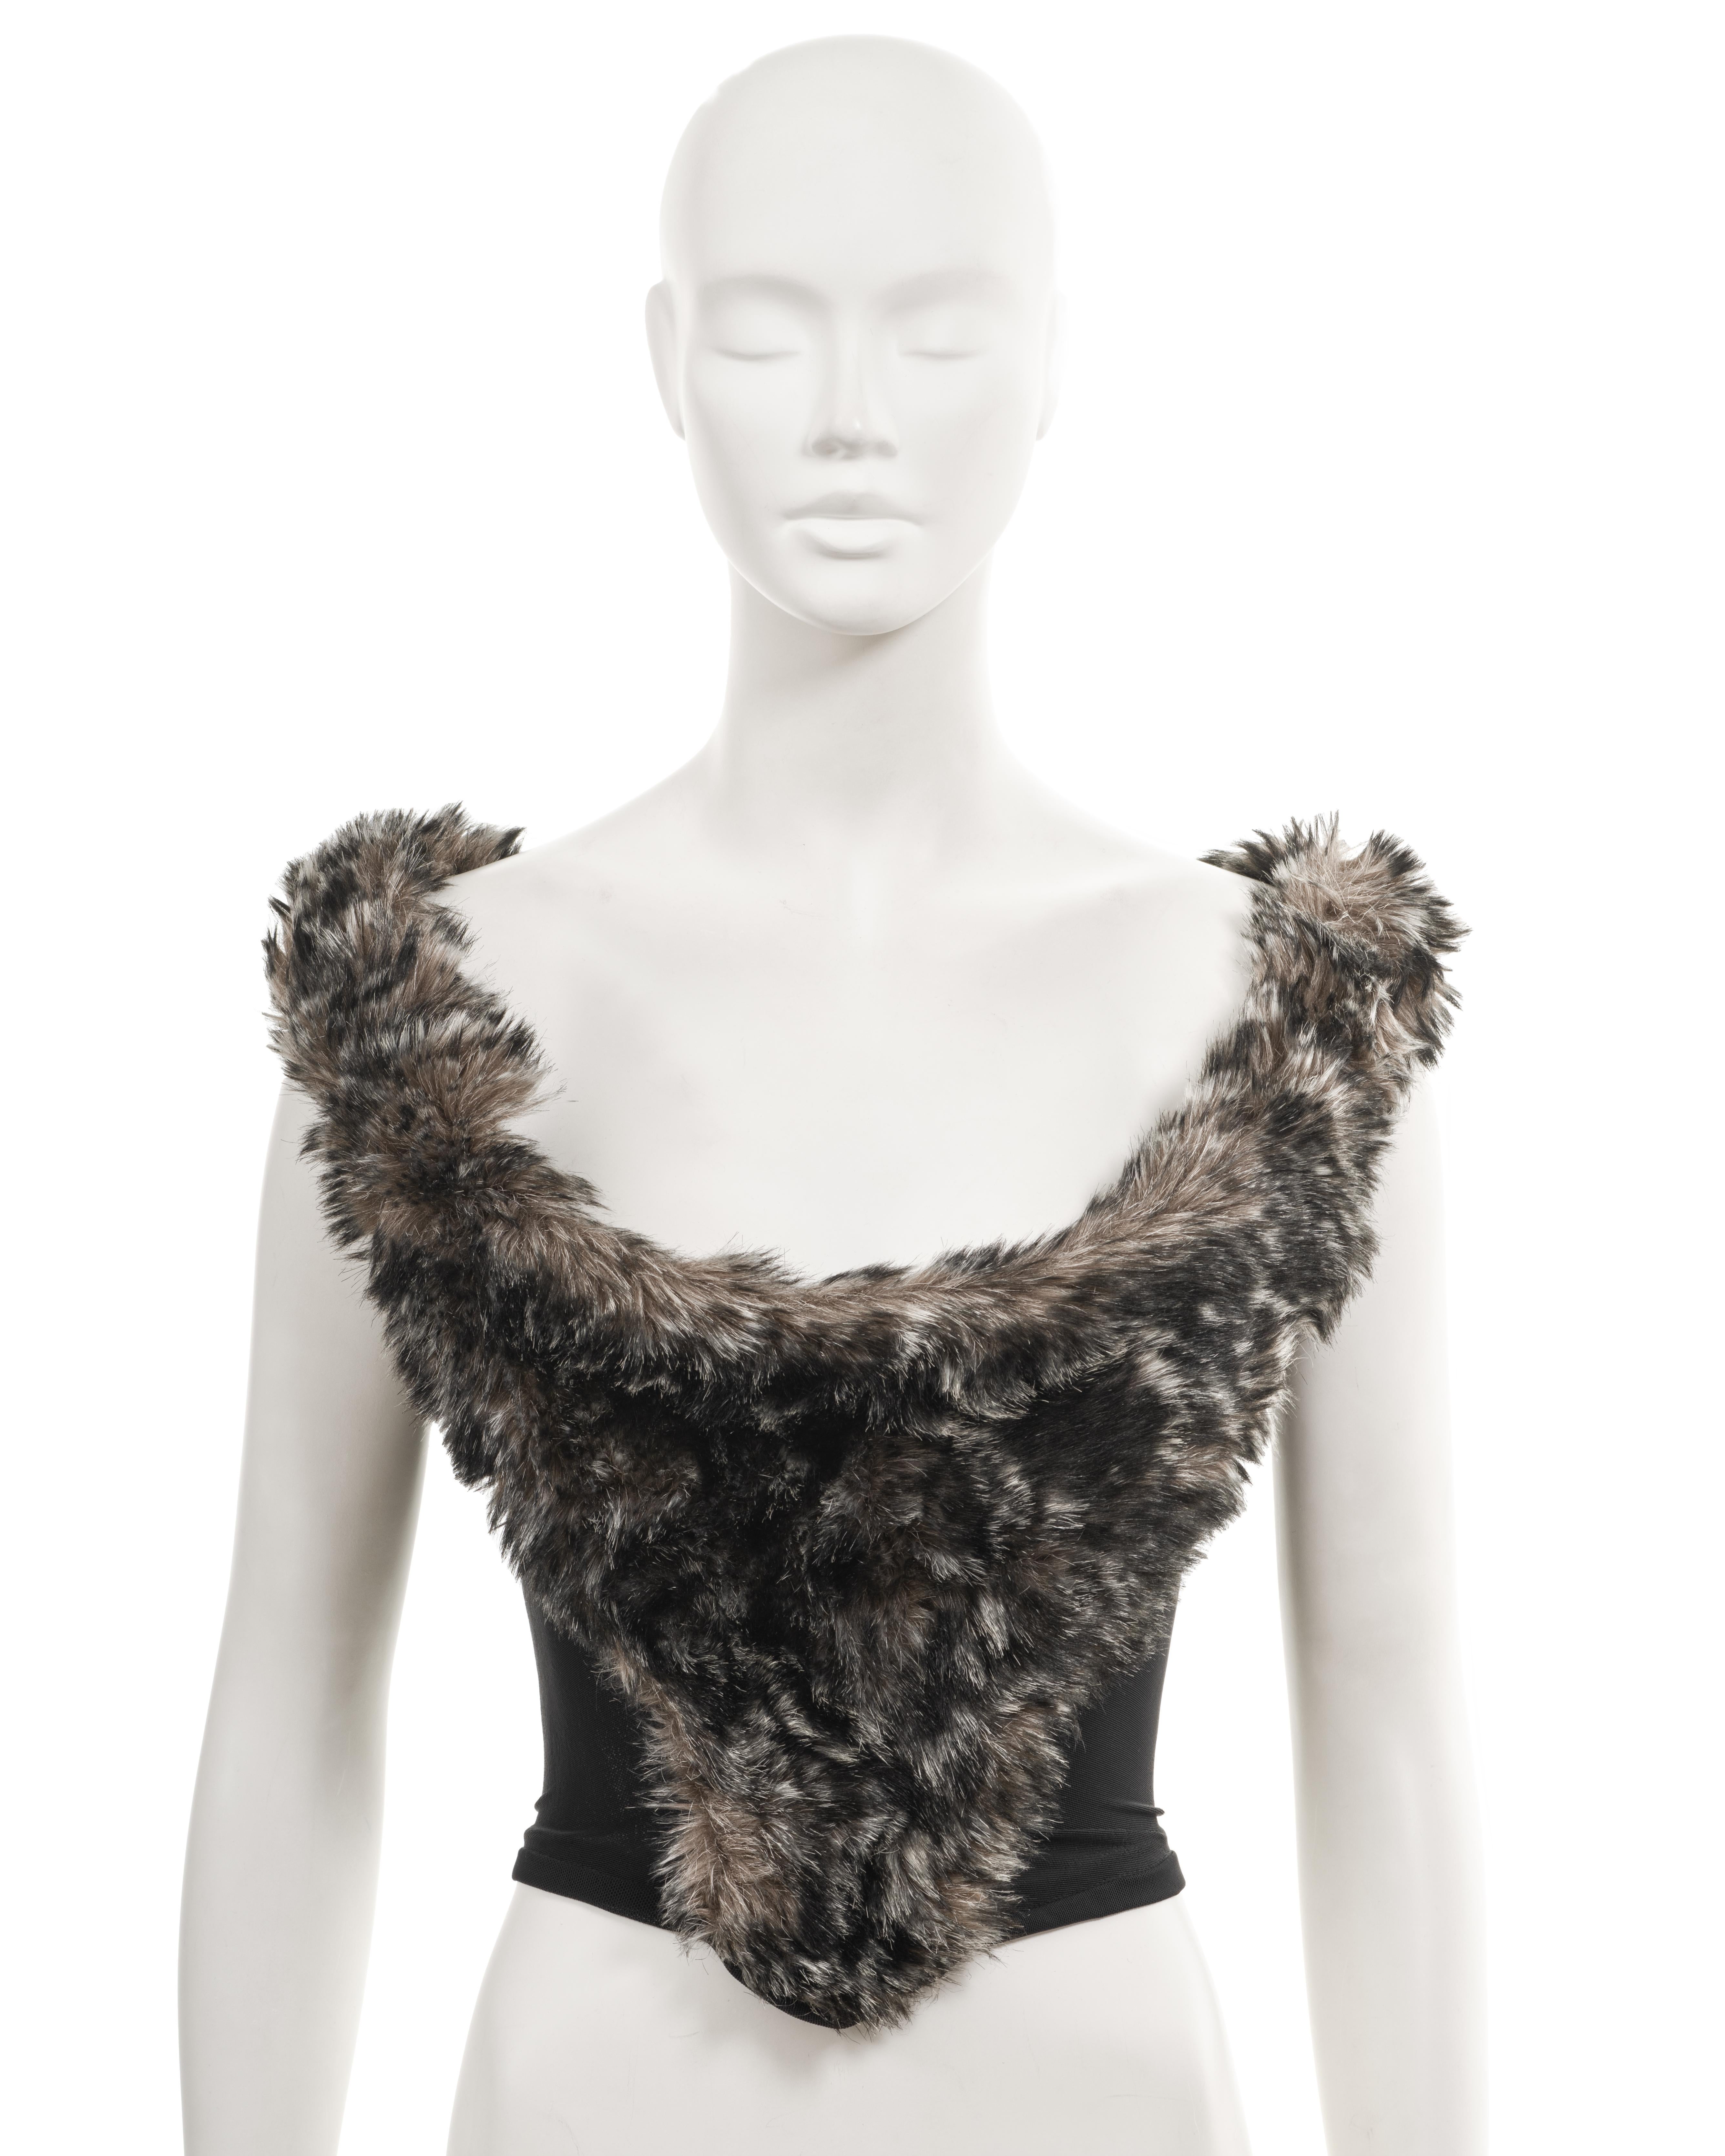 ▪ Archival Vivienne Westwood Corset
▪ Fall-Winter 1993
▪ Sold by One of a Kind Archive
▪ Stomacher and shoulder straps adorned with faux fur 
▪ Black power-mesh corset bodice 
▪ Internal boning provides excellent support and structure, allowing the